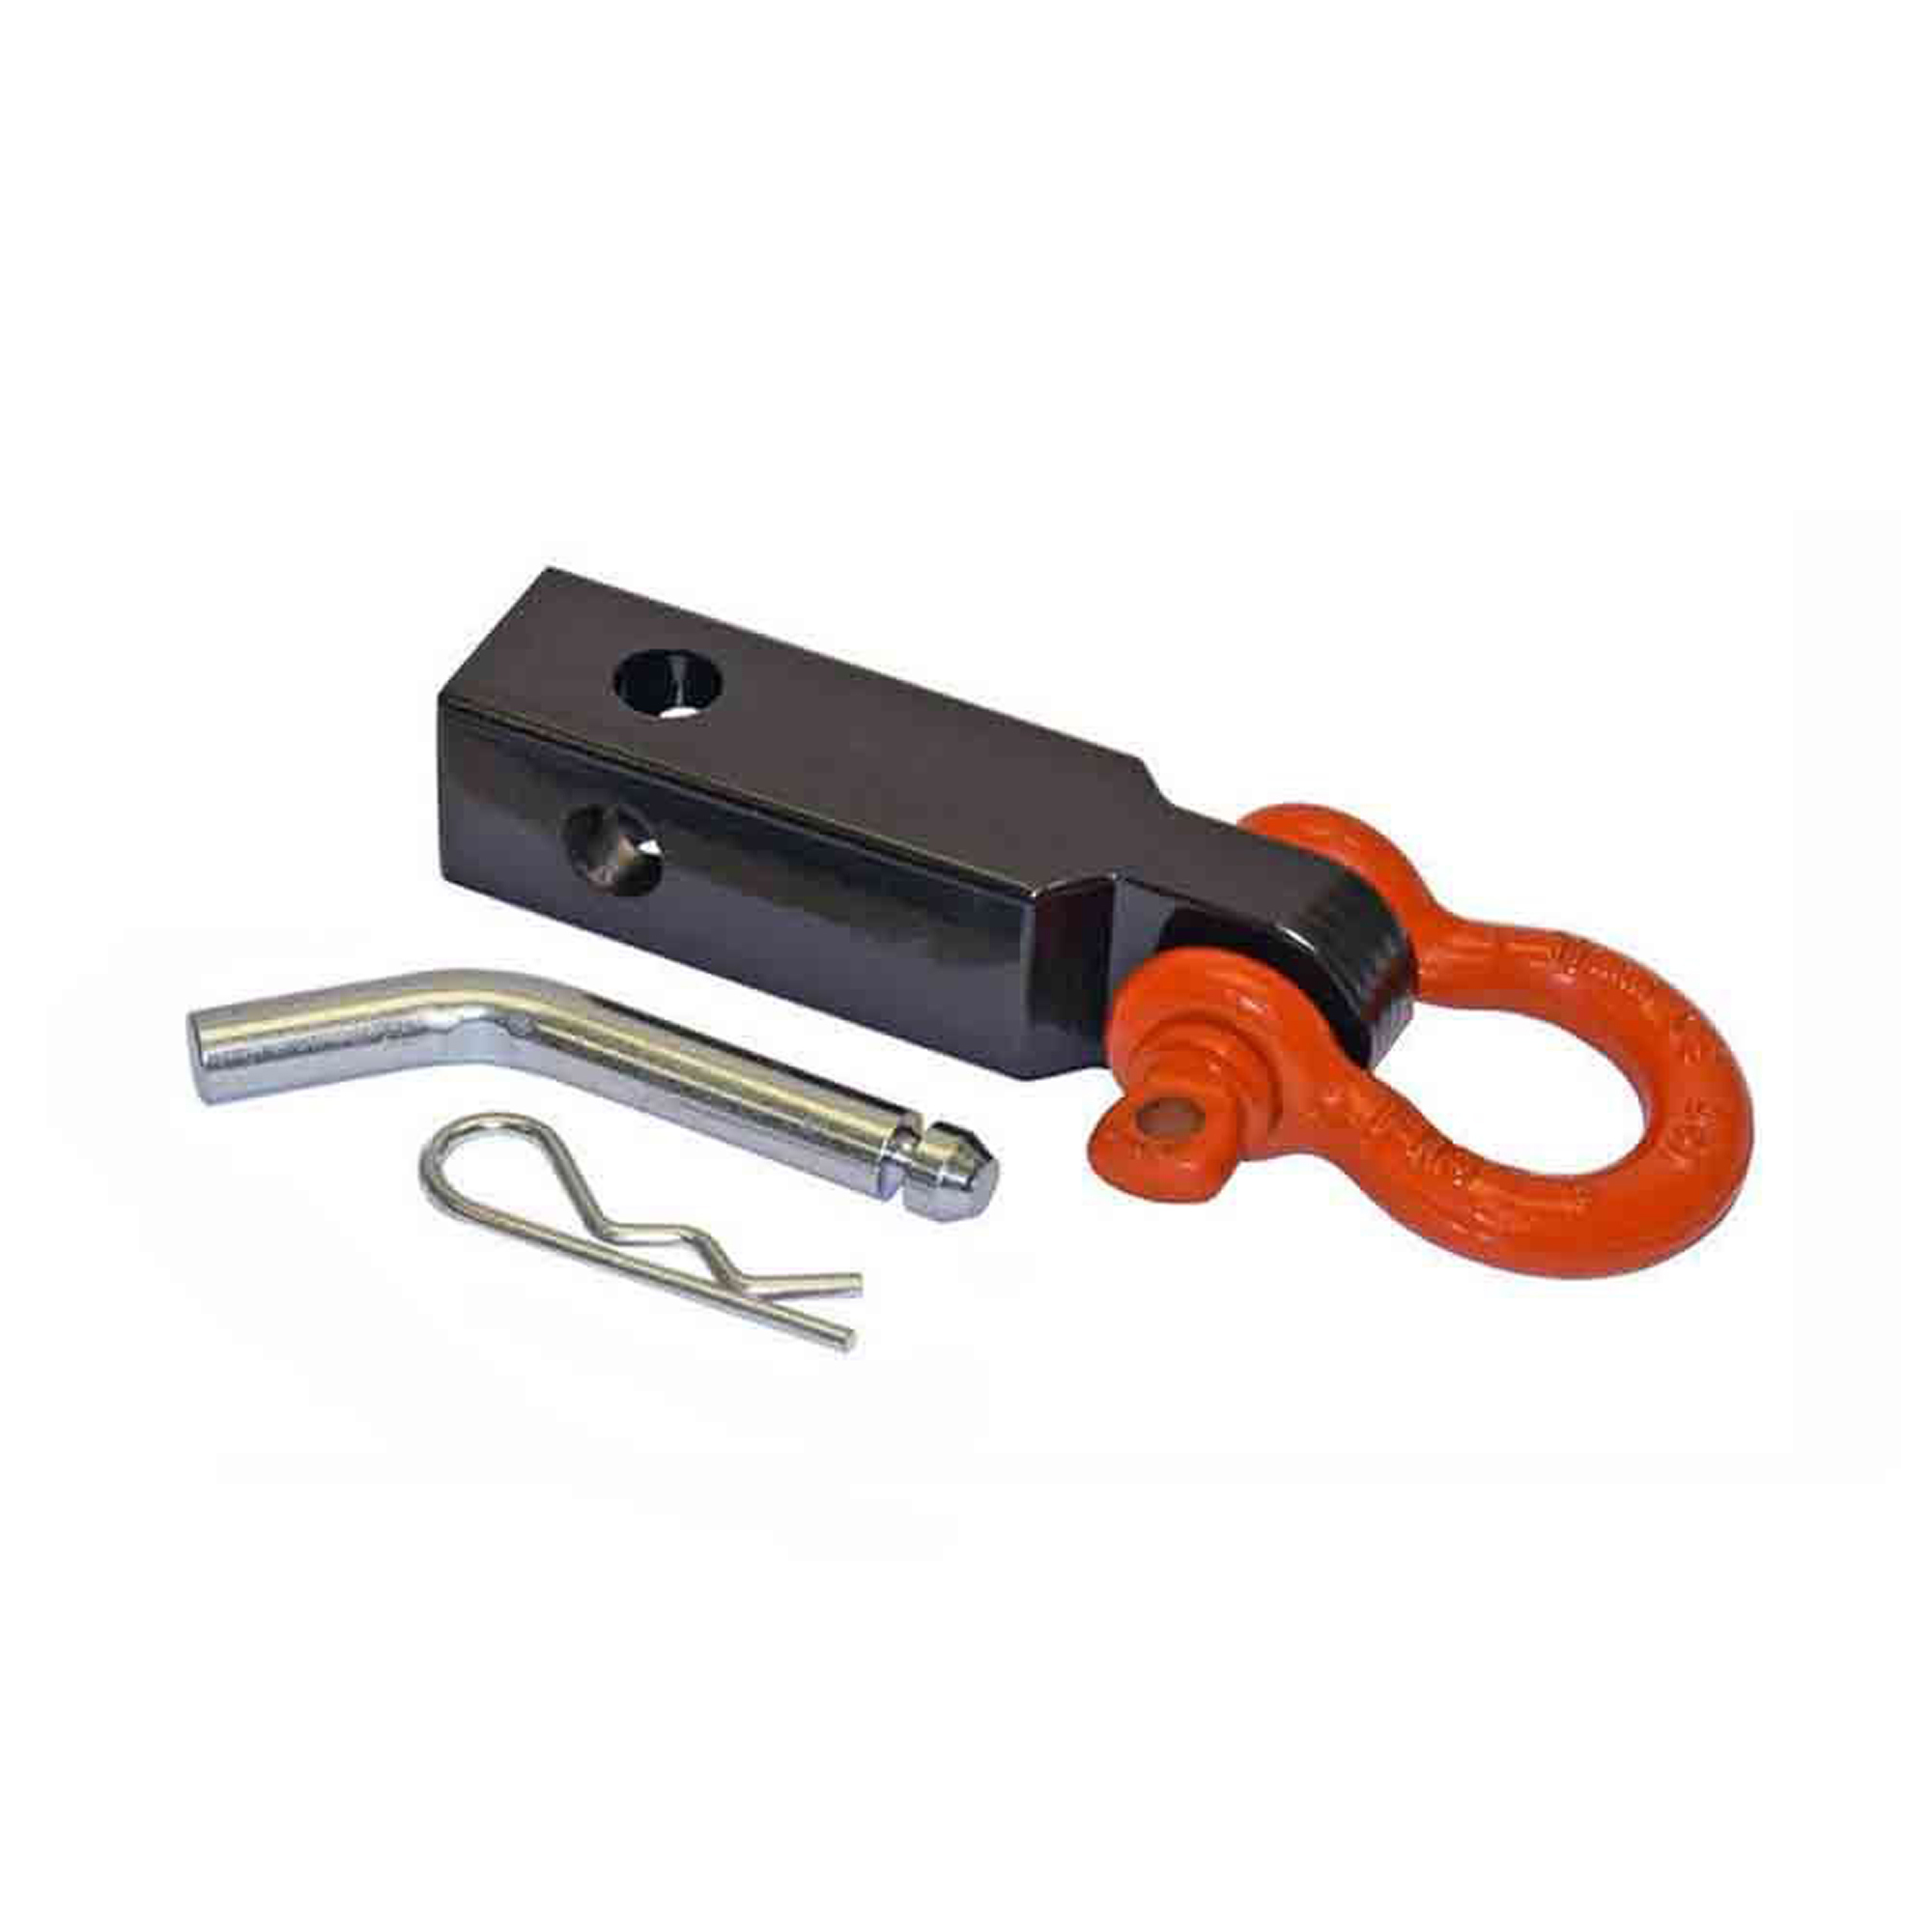 Rigid Hitch, Shackle Mount, 1.25Inch Rcvr, 4K lb, With Pin/Clip, Gross Towing Weight 3500 lb, Model TSM-125-D